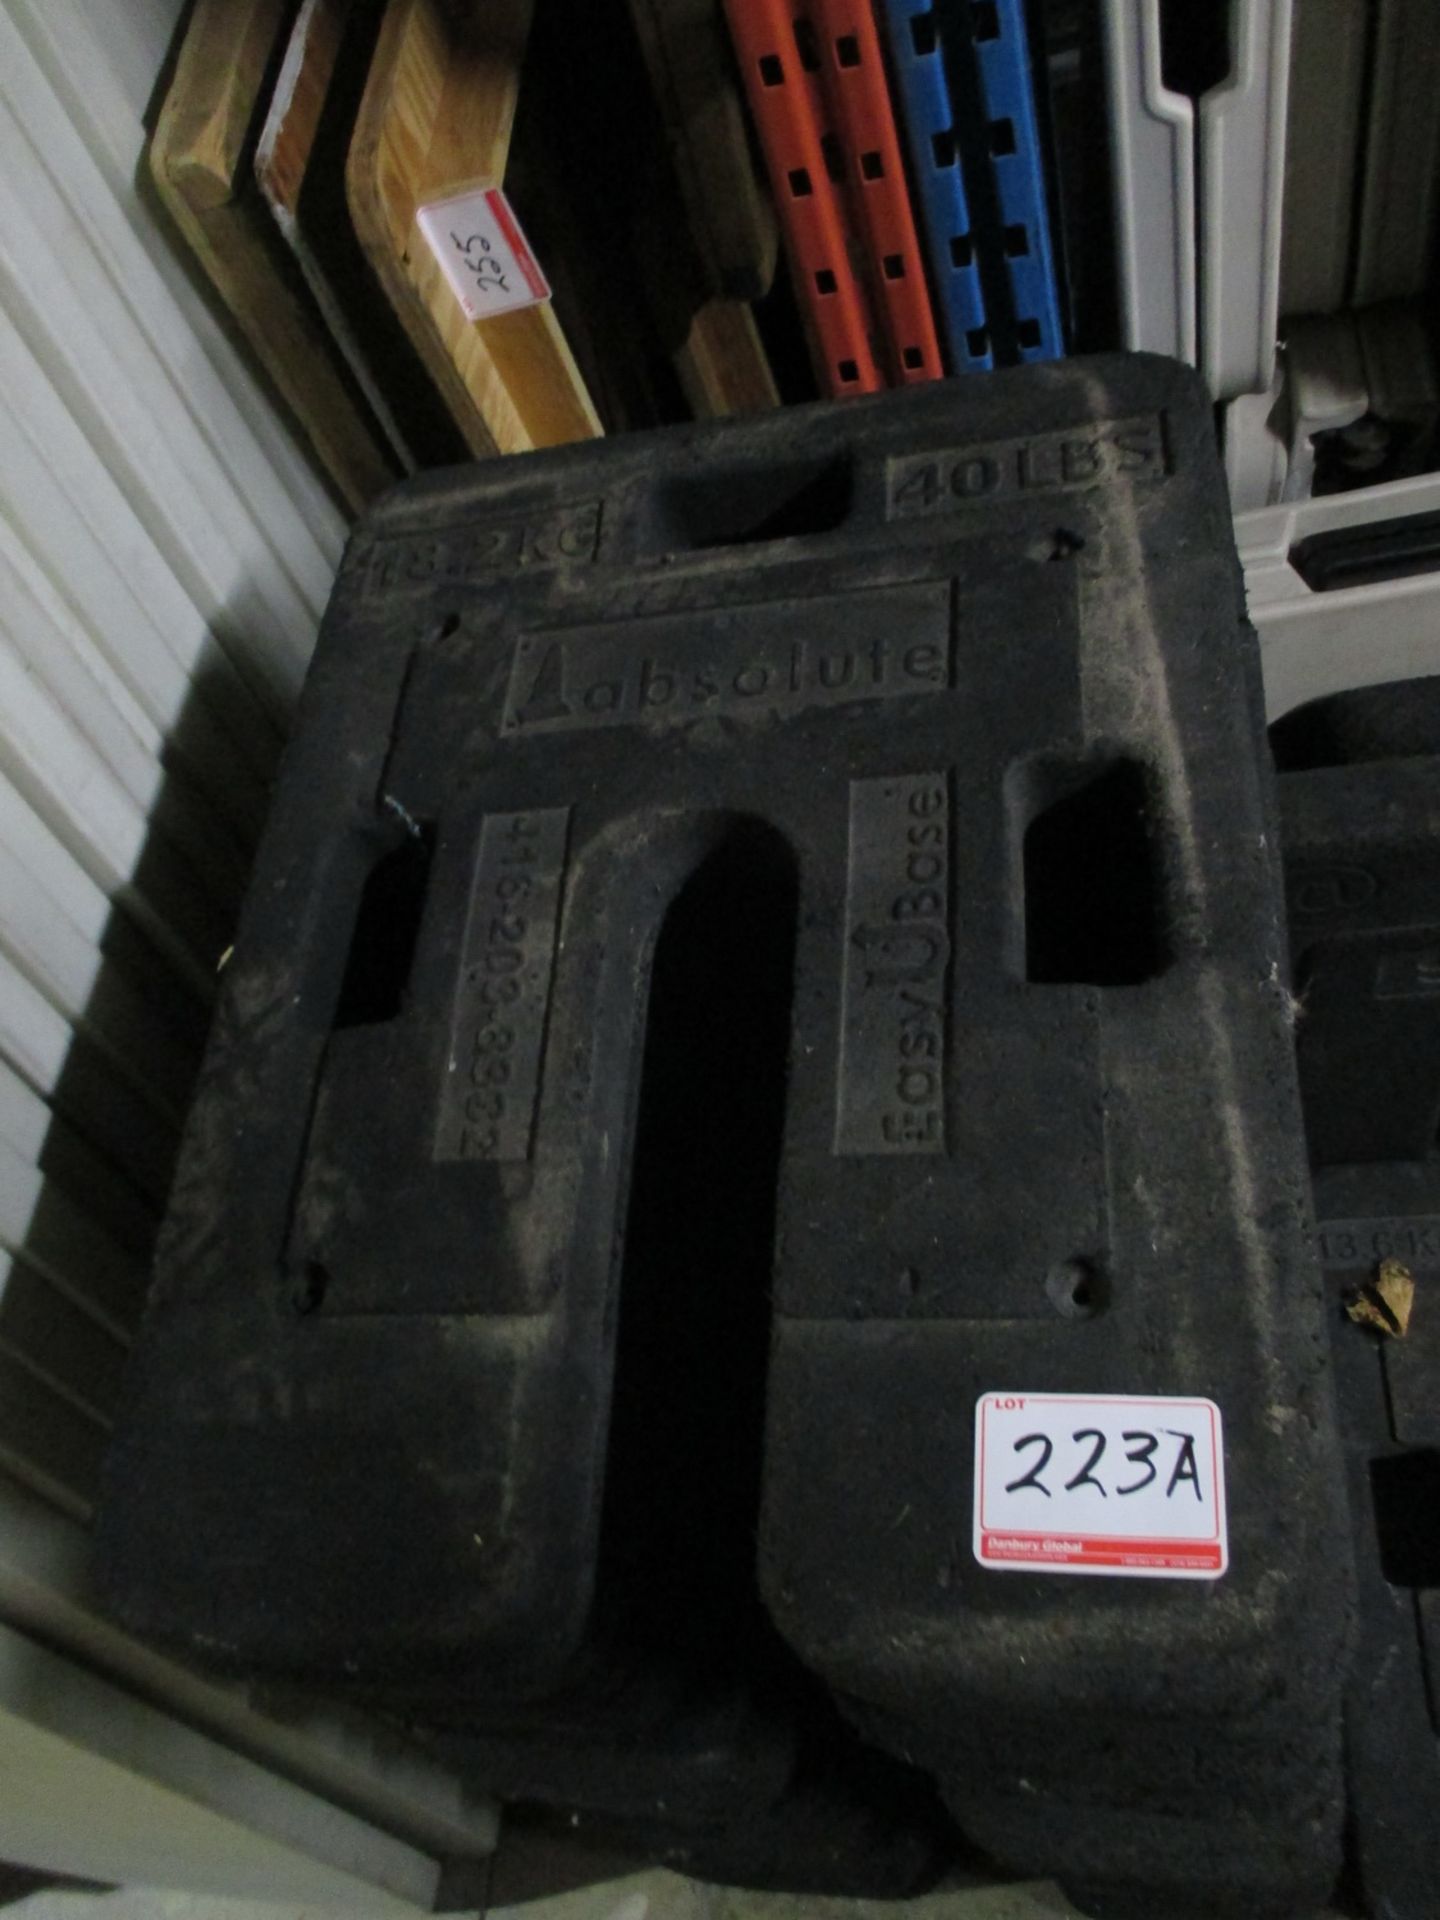 ABSOLUTE 40 LB RUBBER 20 1/2" X 27 " POST WEIGHTS